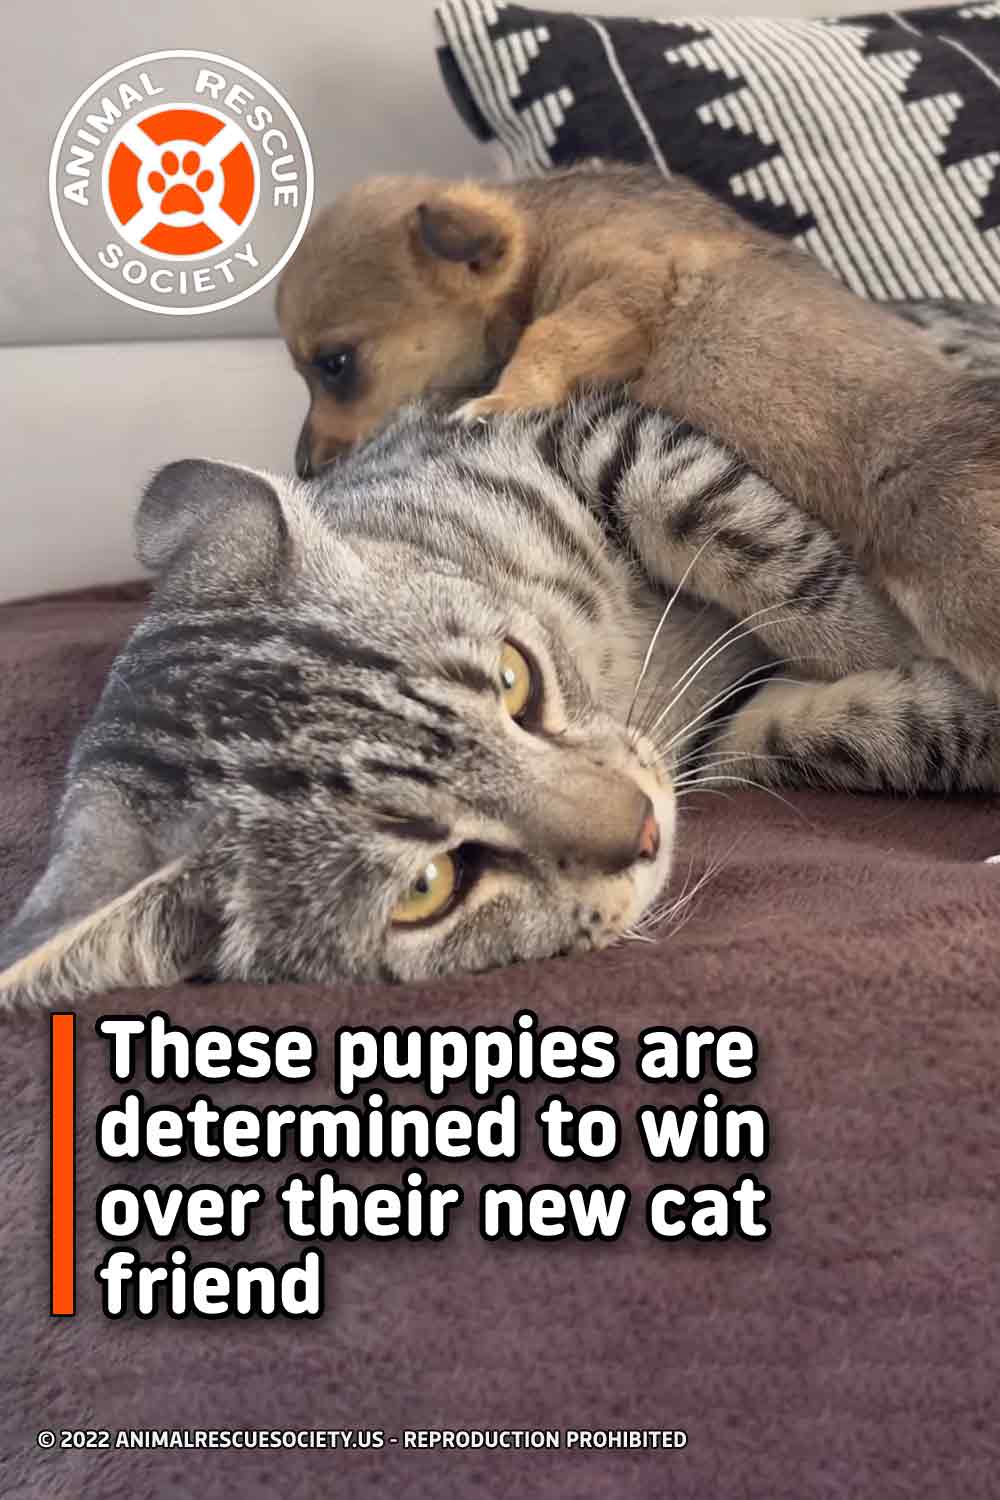 These puppies are determined to win over their new cat friend